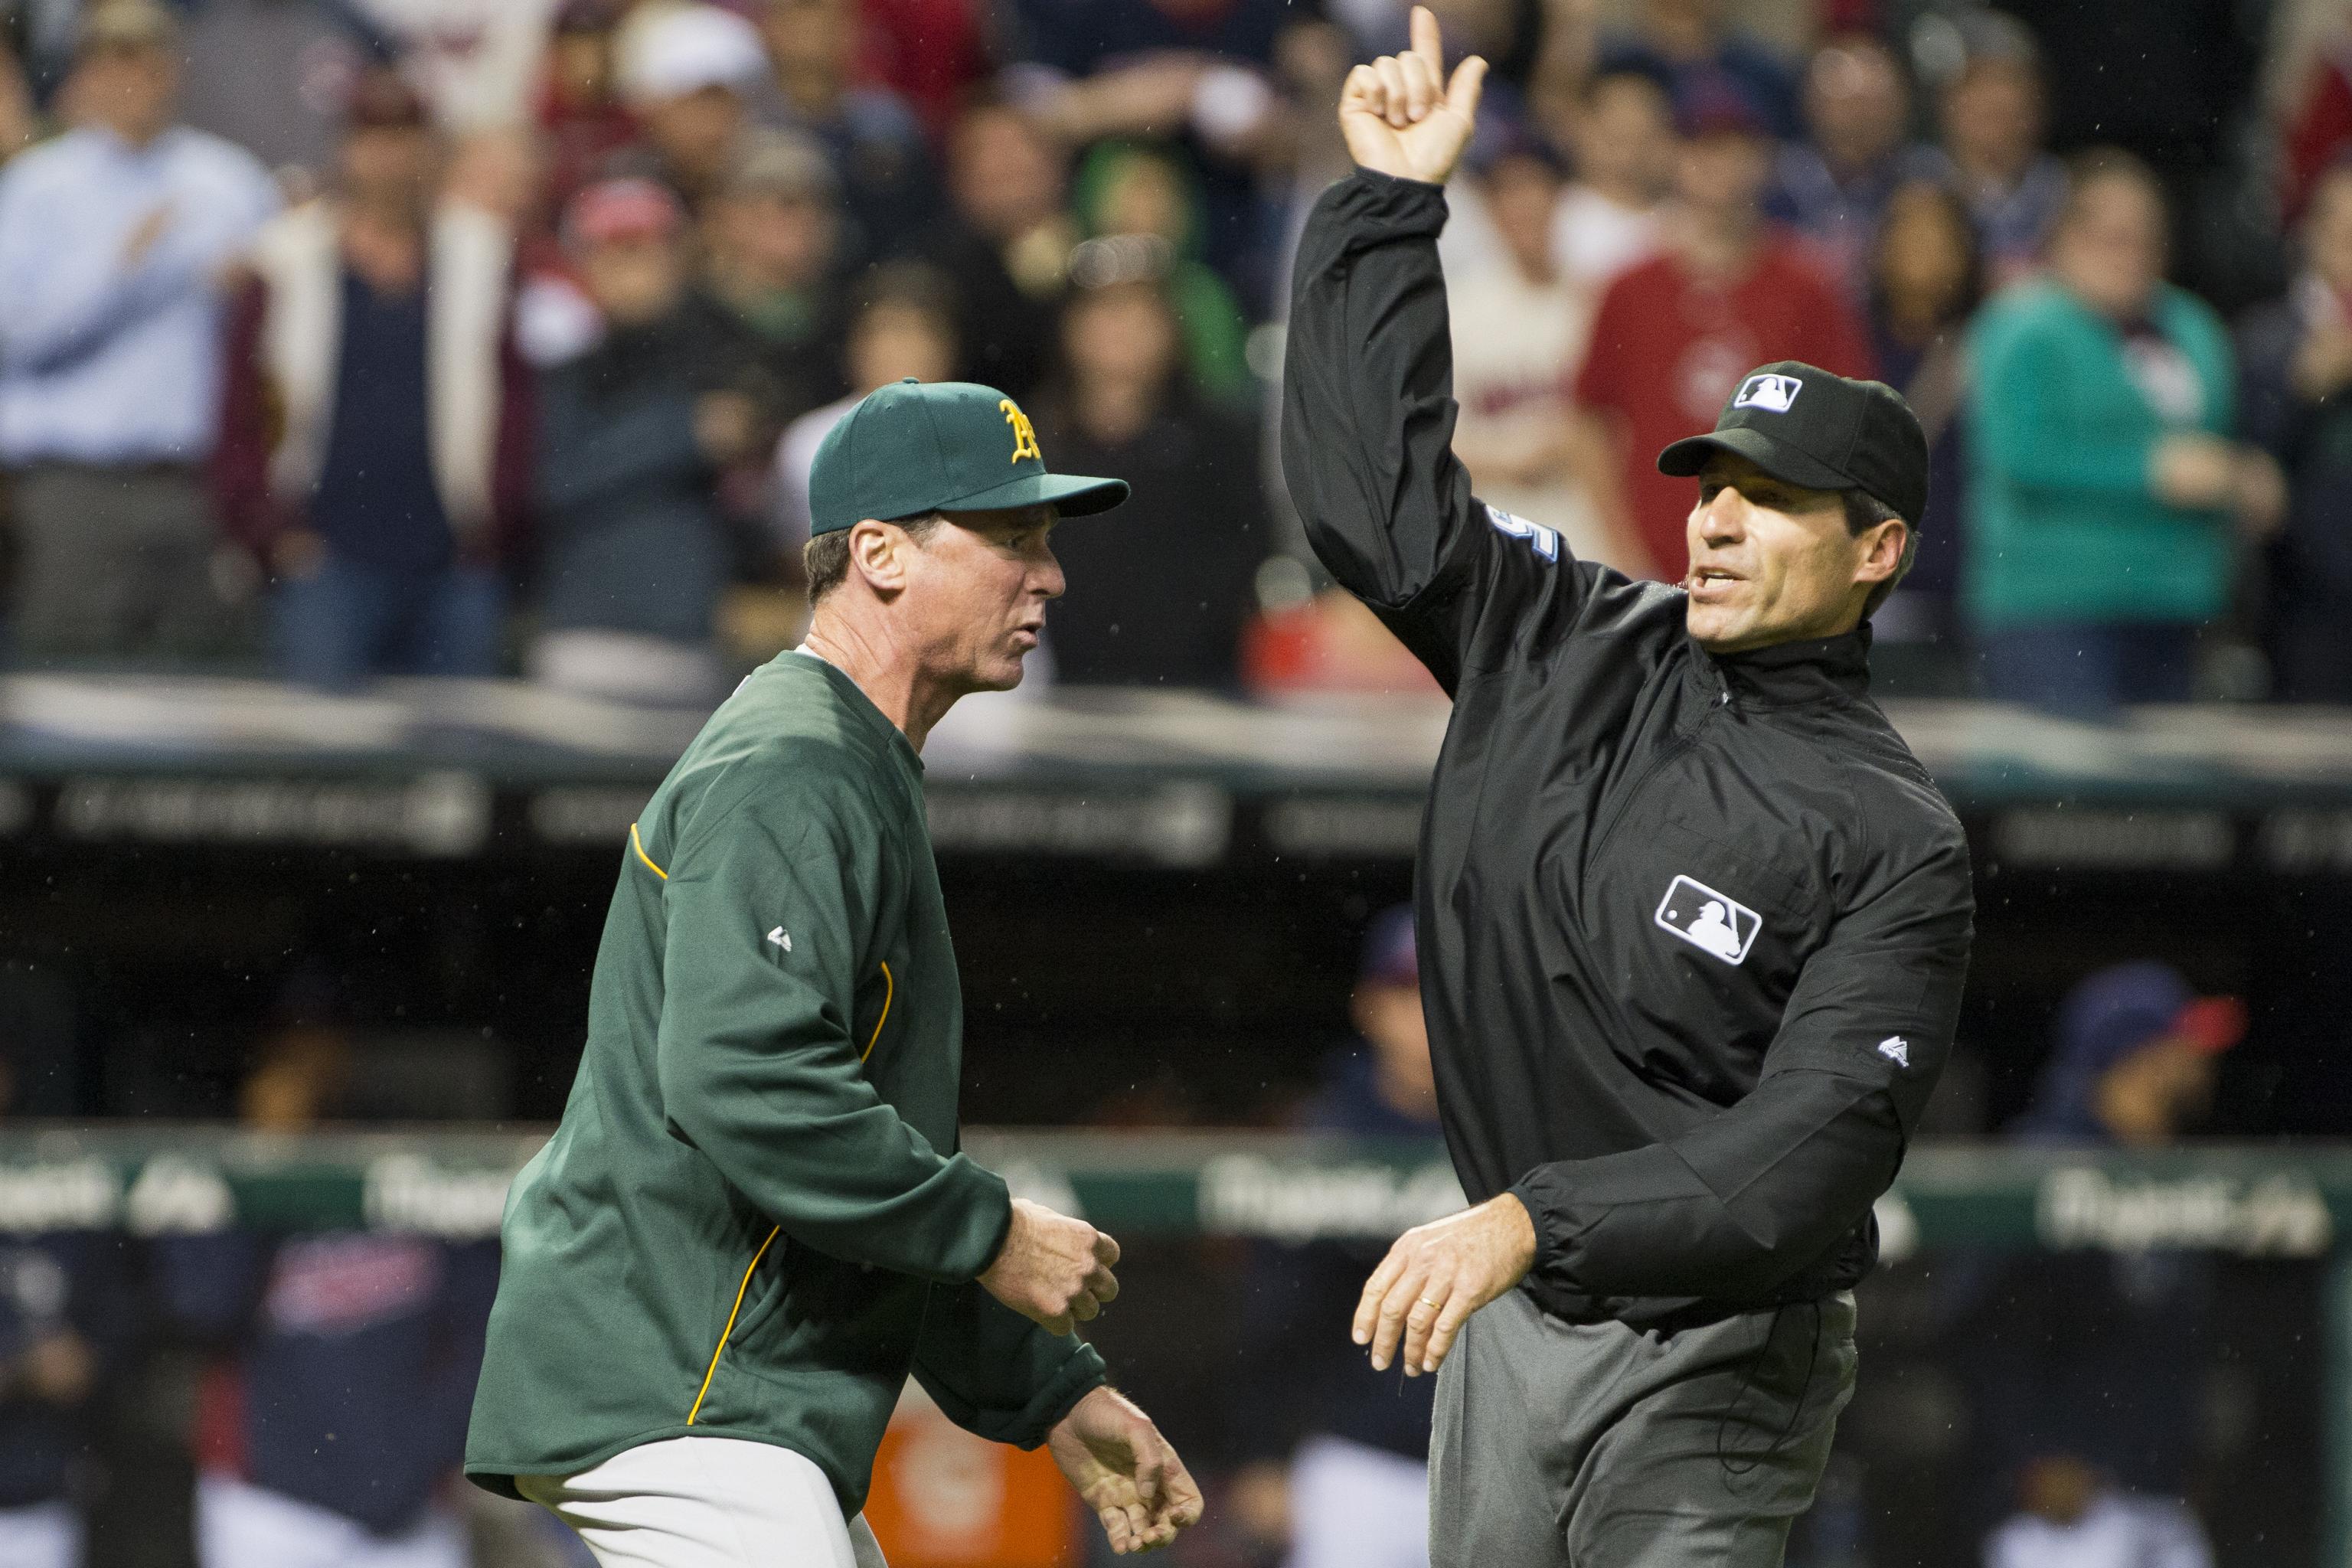 Petition · Remove MLB Umpire Angel Hernandez from Officiating